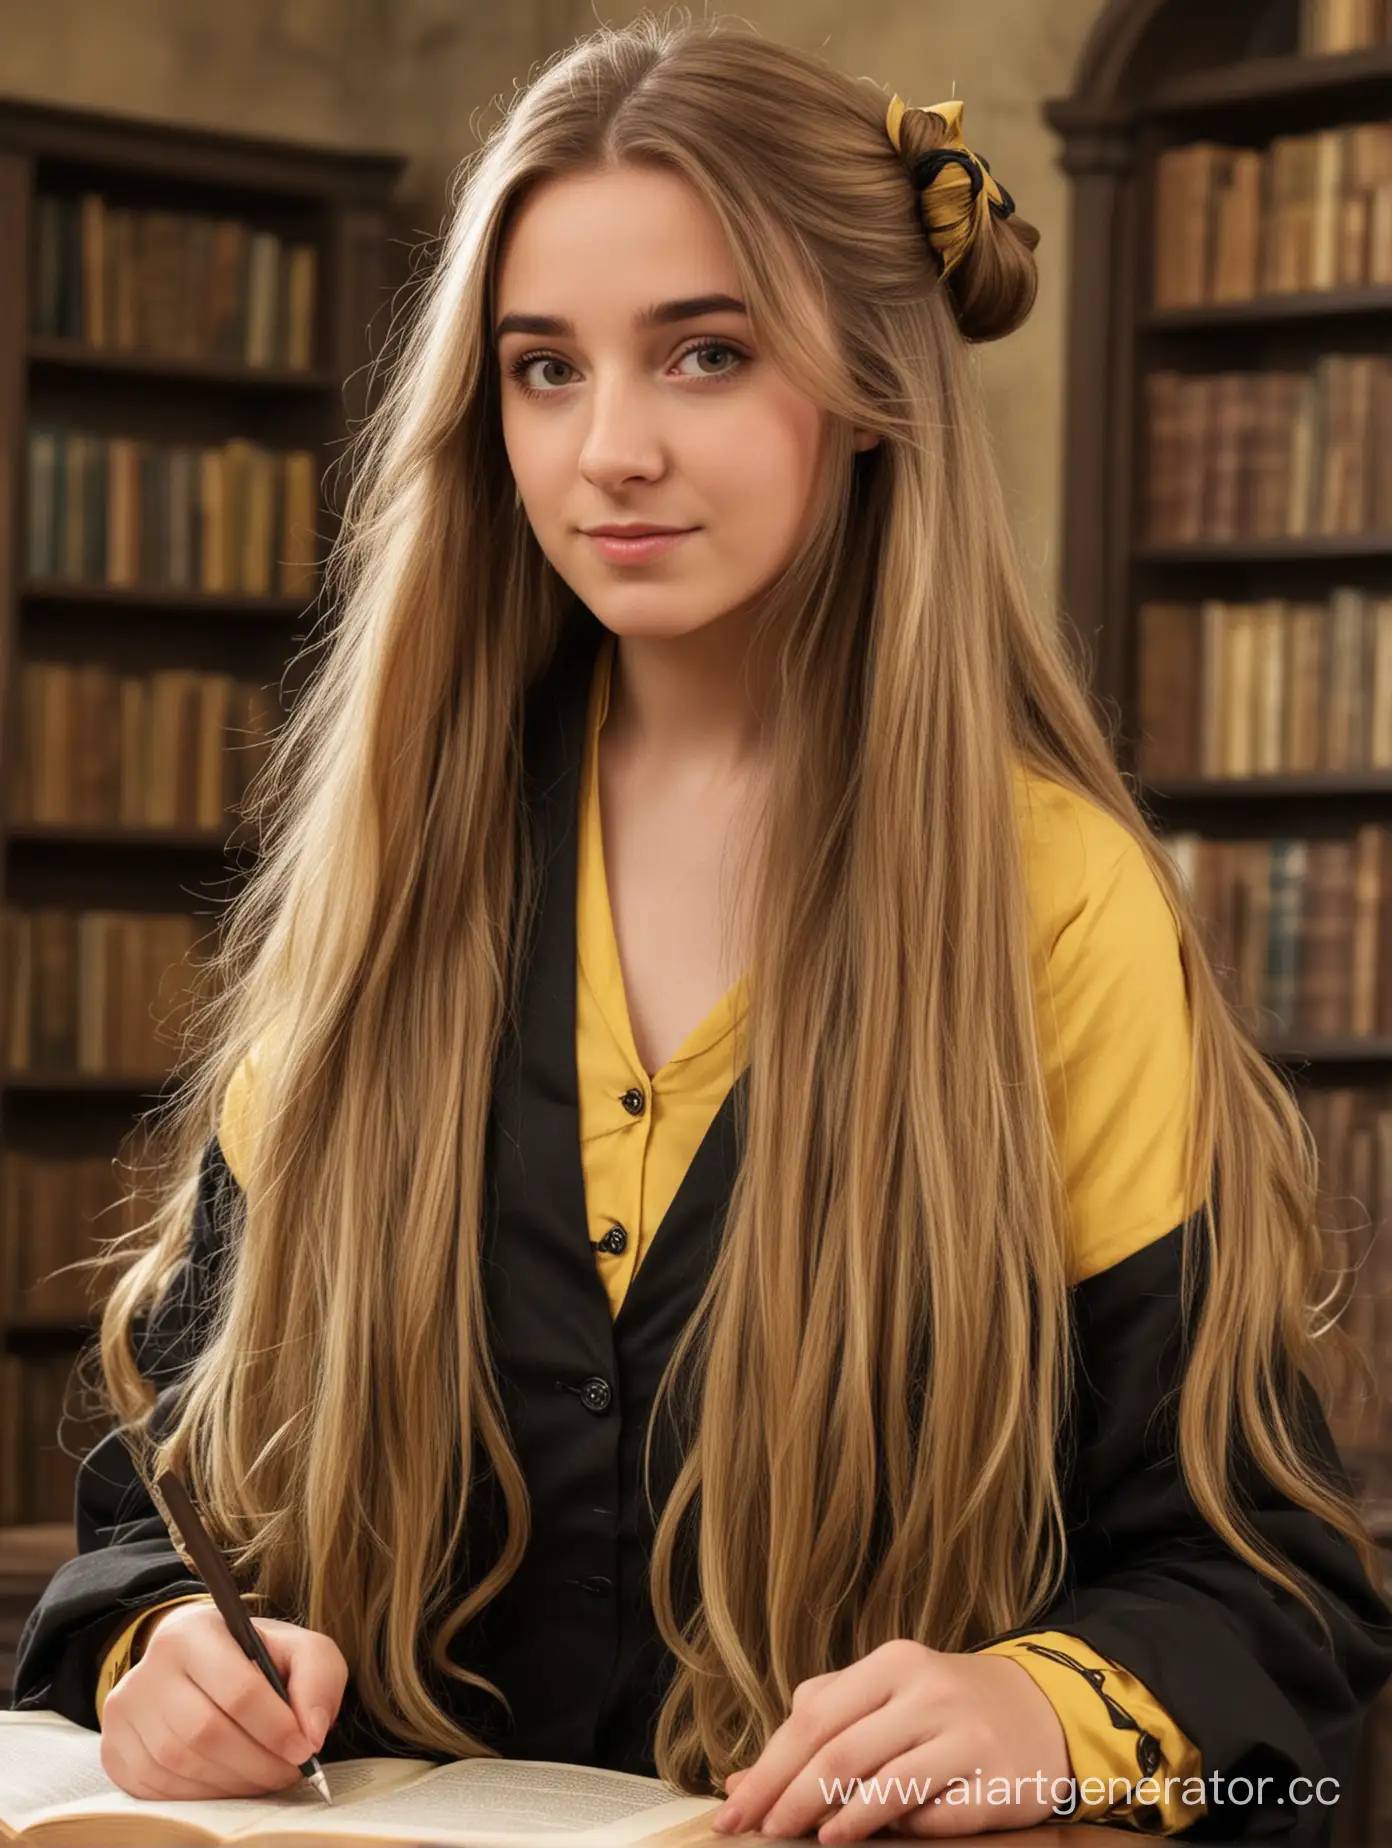 Hufflepuff-Girl-with-Flowing-Hair-Enthusiastic-Learner-in-Hogwarts-House